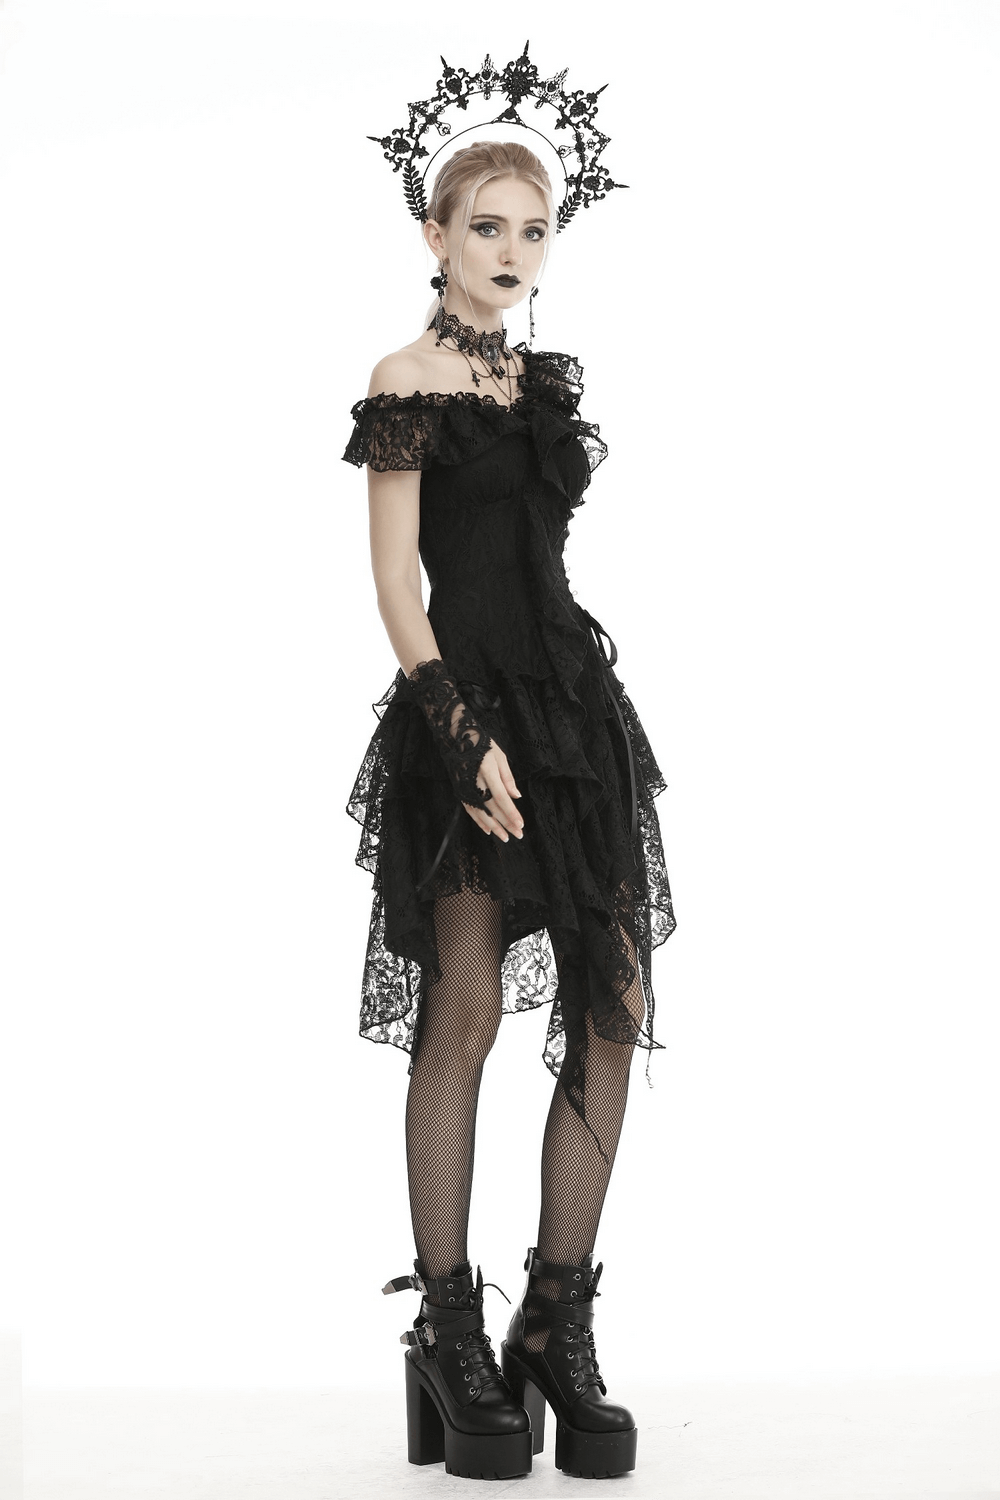 Elegant Black Lace Dress With Ribbon Accents And Sheer Overlay